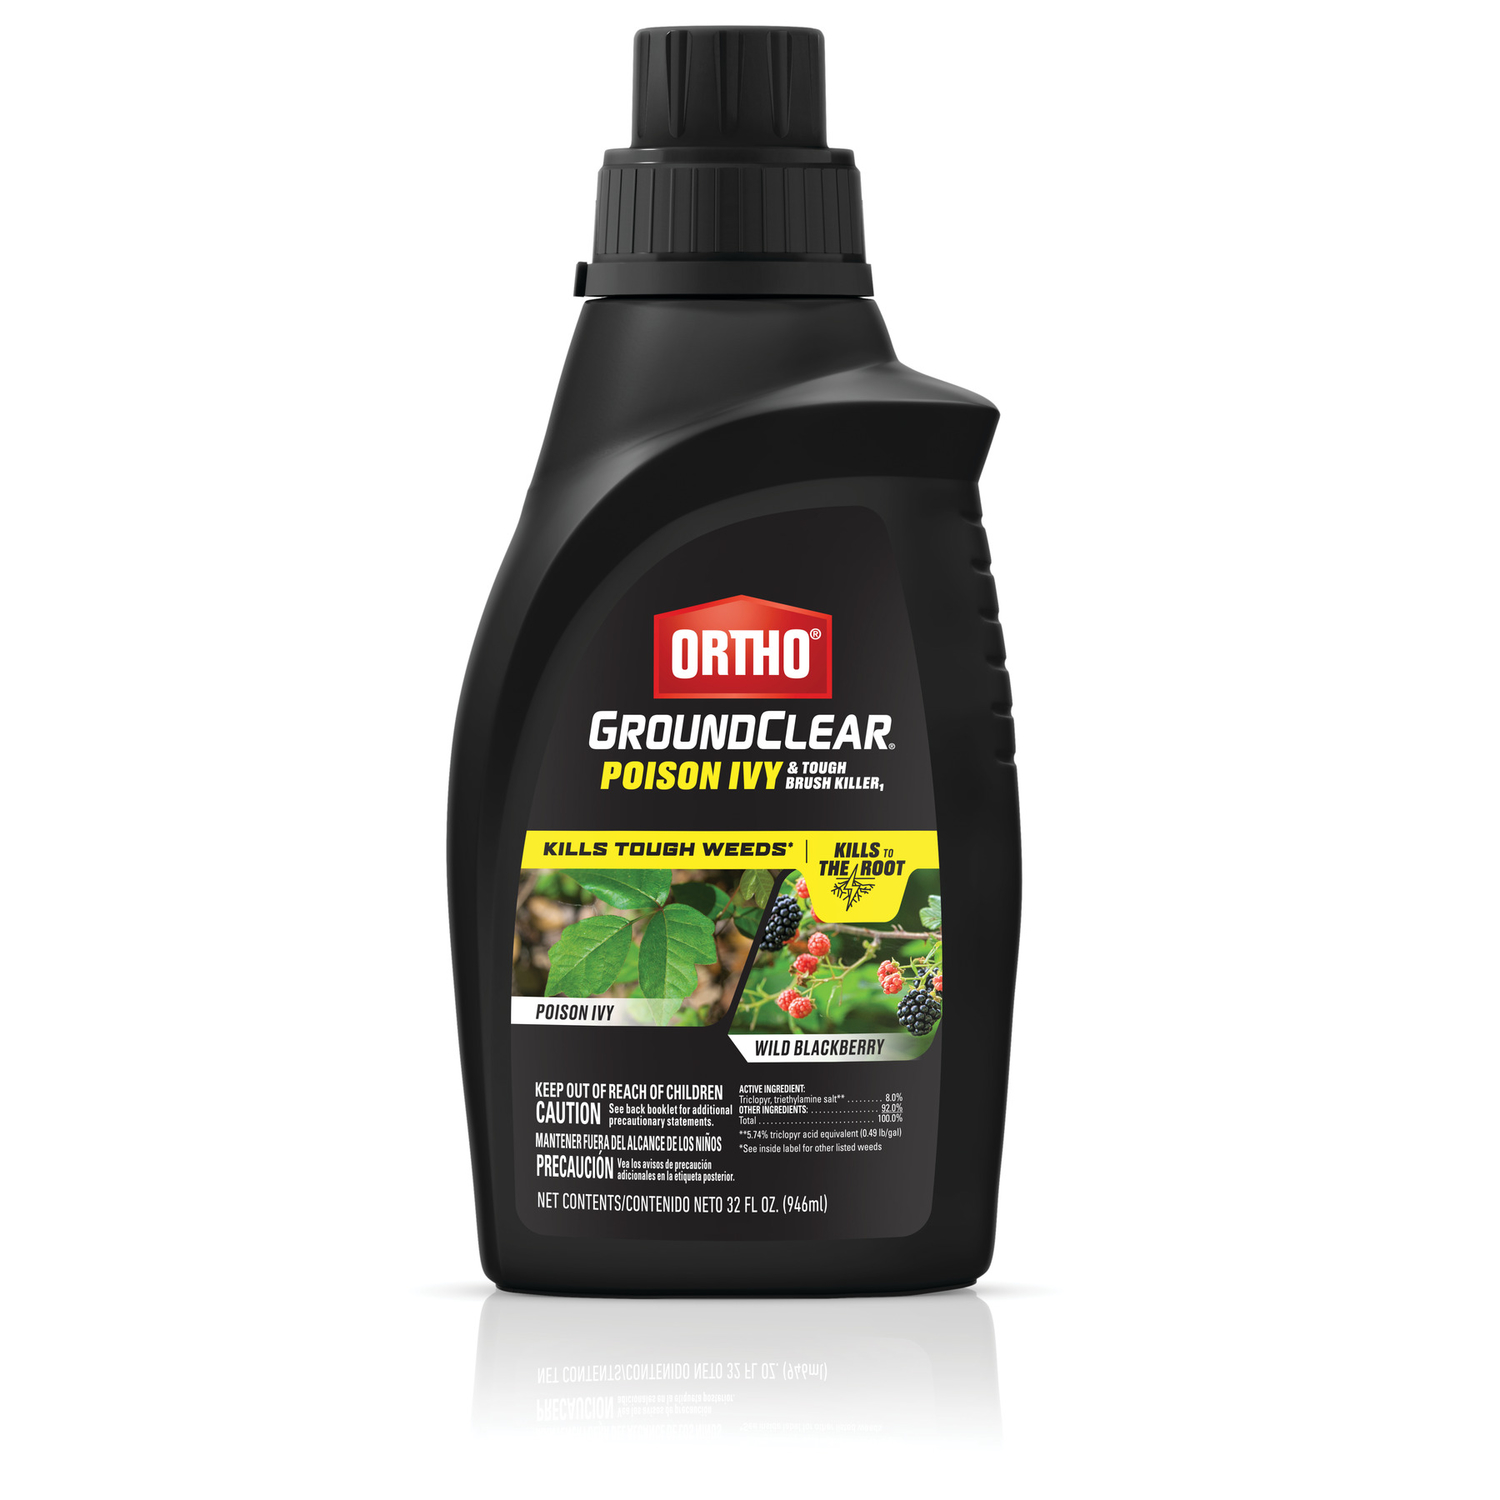 Ortho GroundClear Poison Ivy Killer Concentrate 32 oz